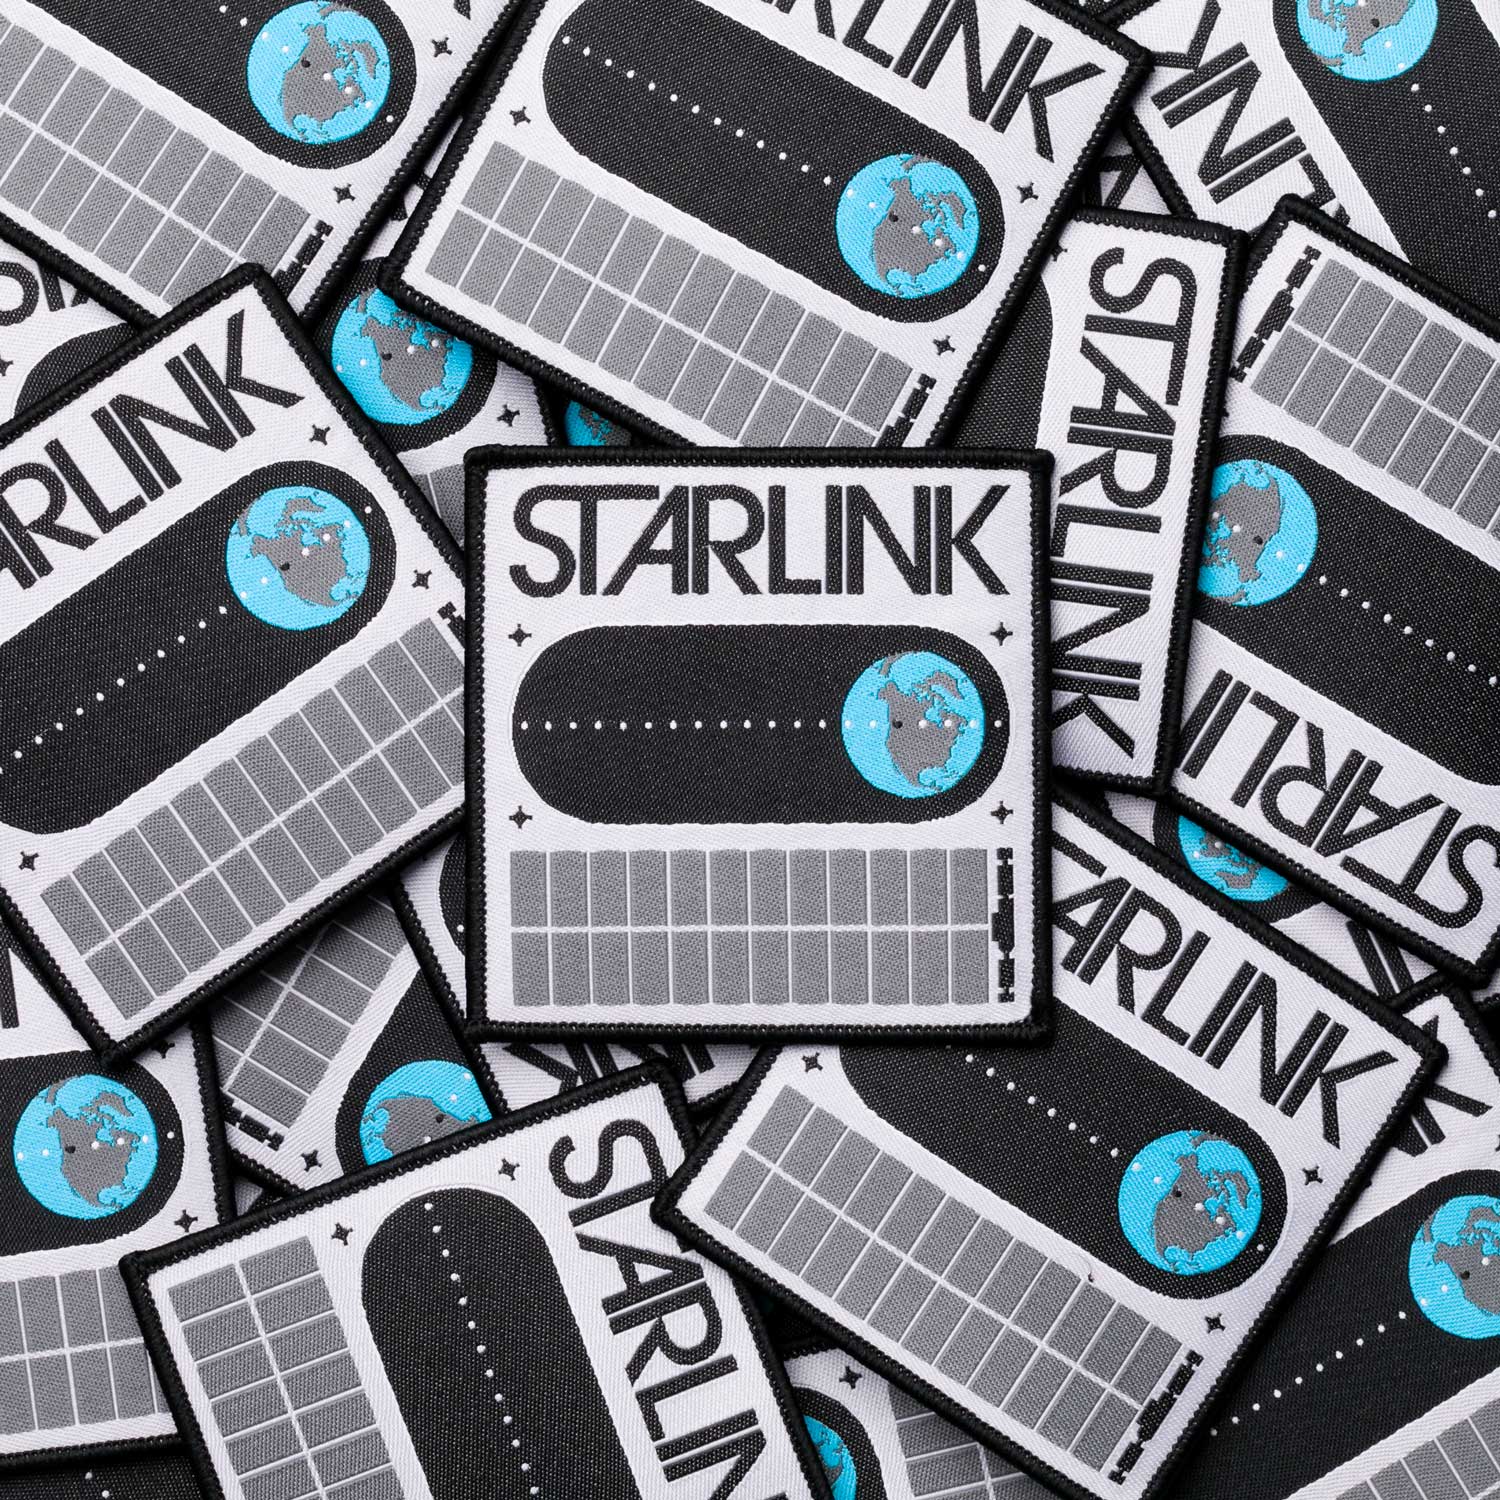 STARLINK GRAY MISSION PATCH